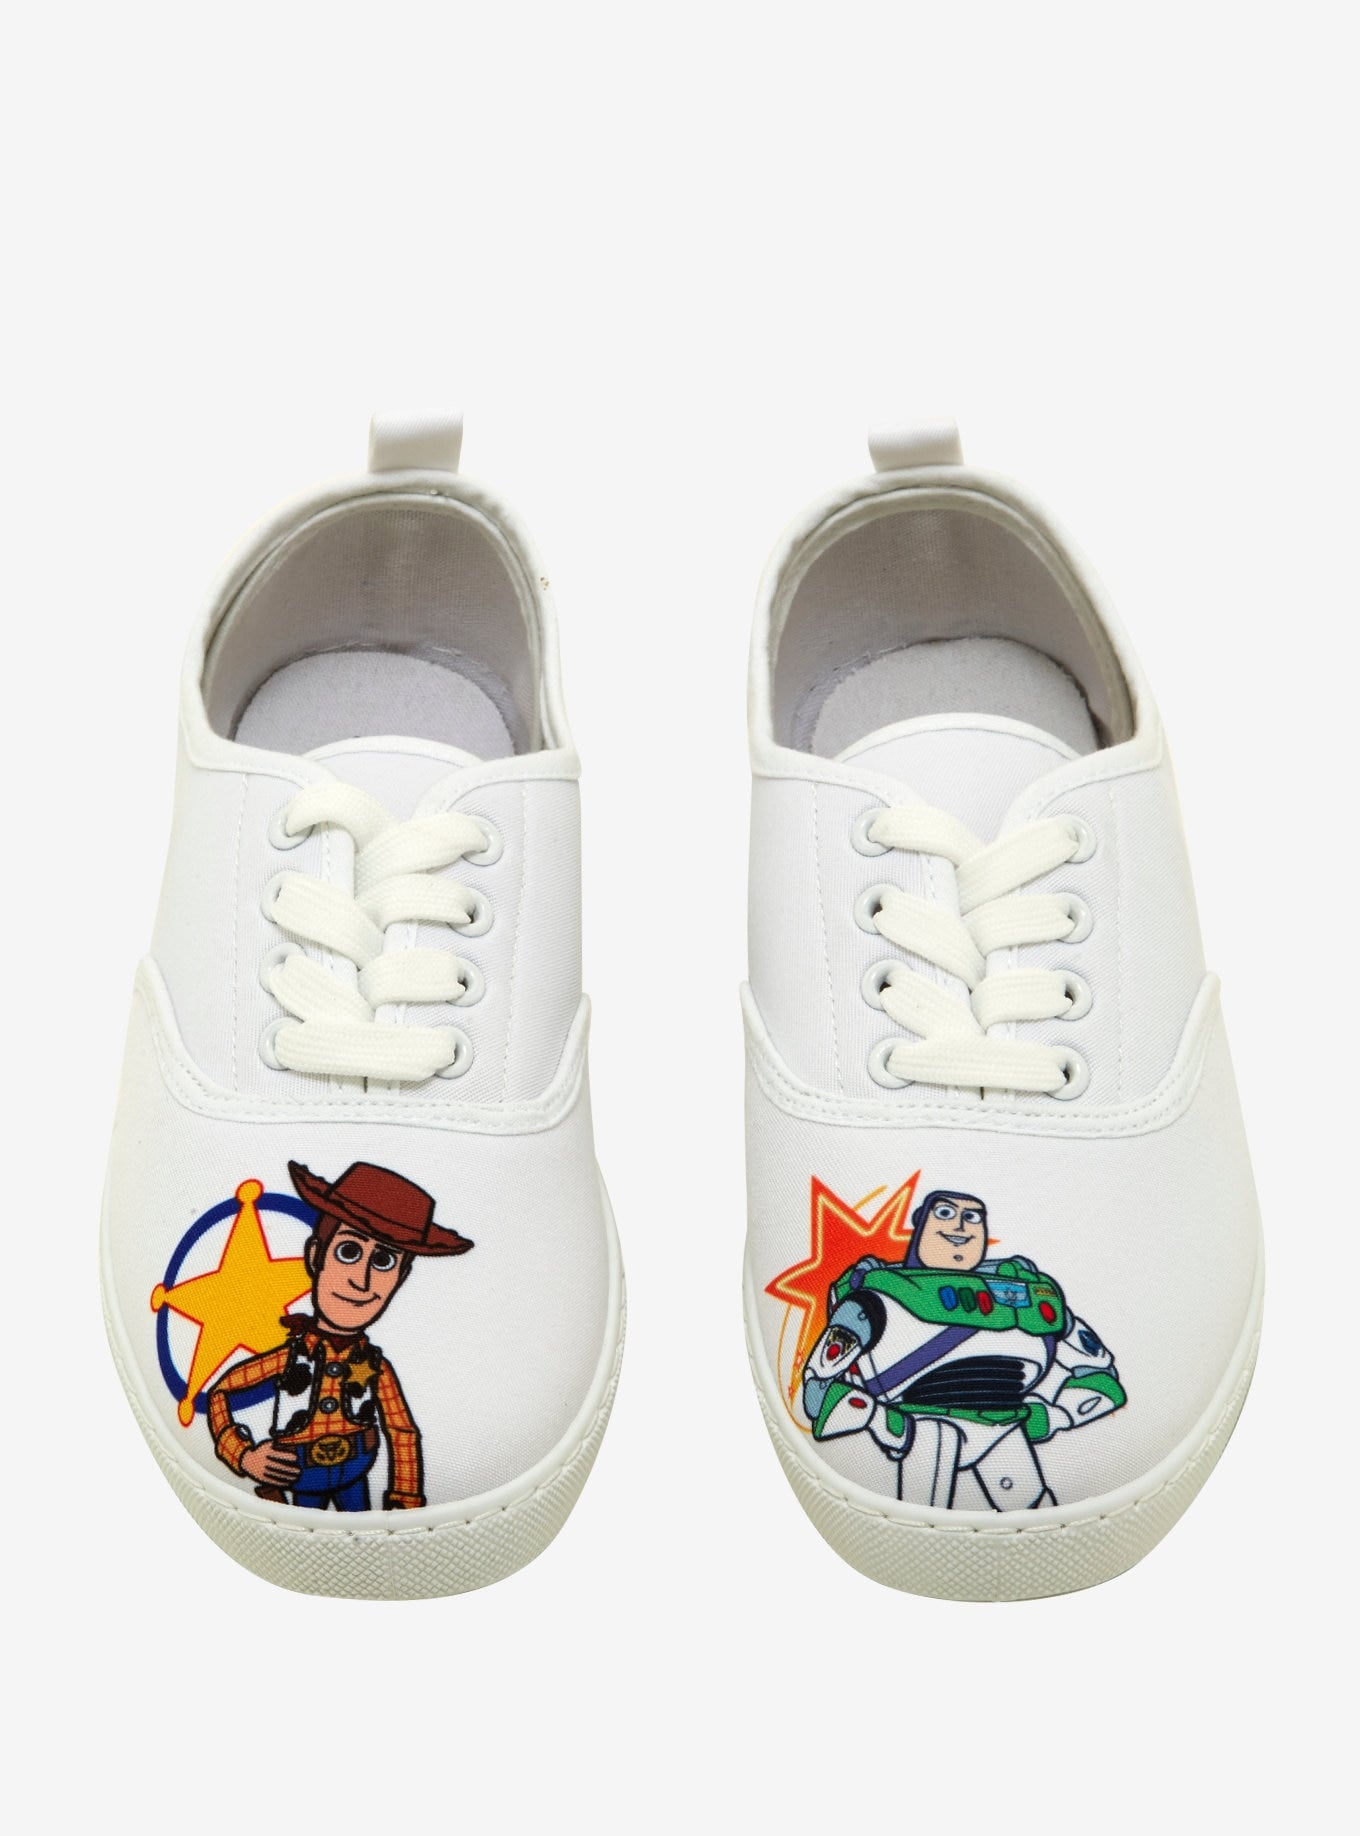 woody and buzz sneakers